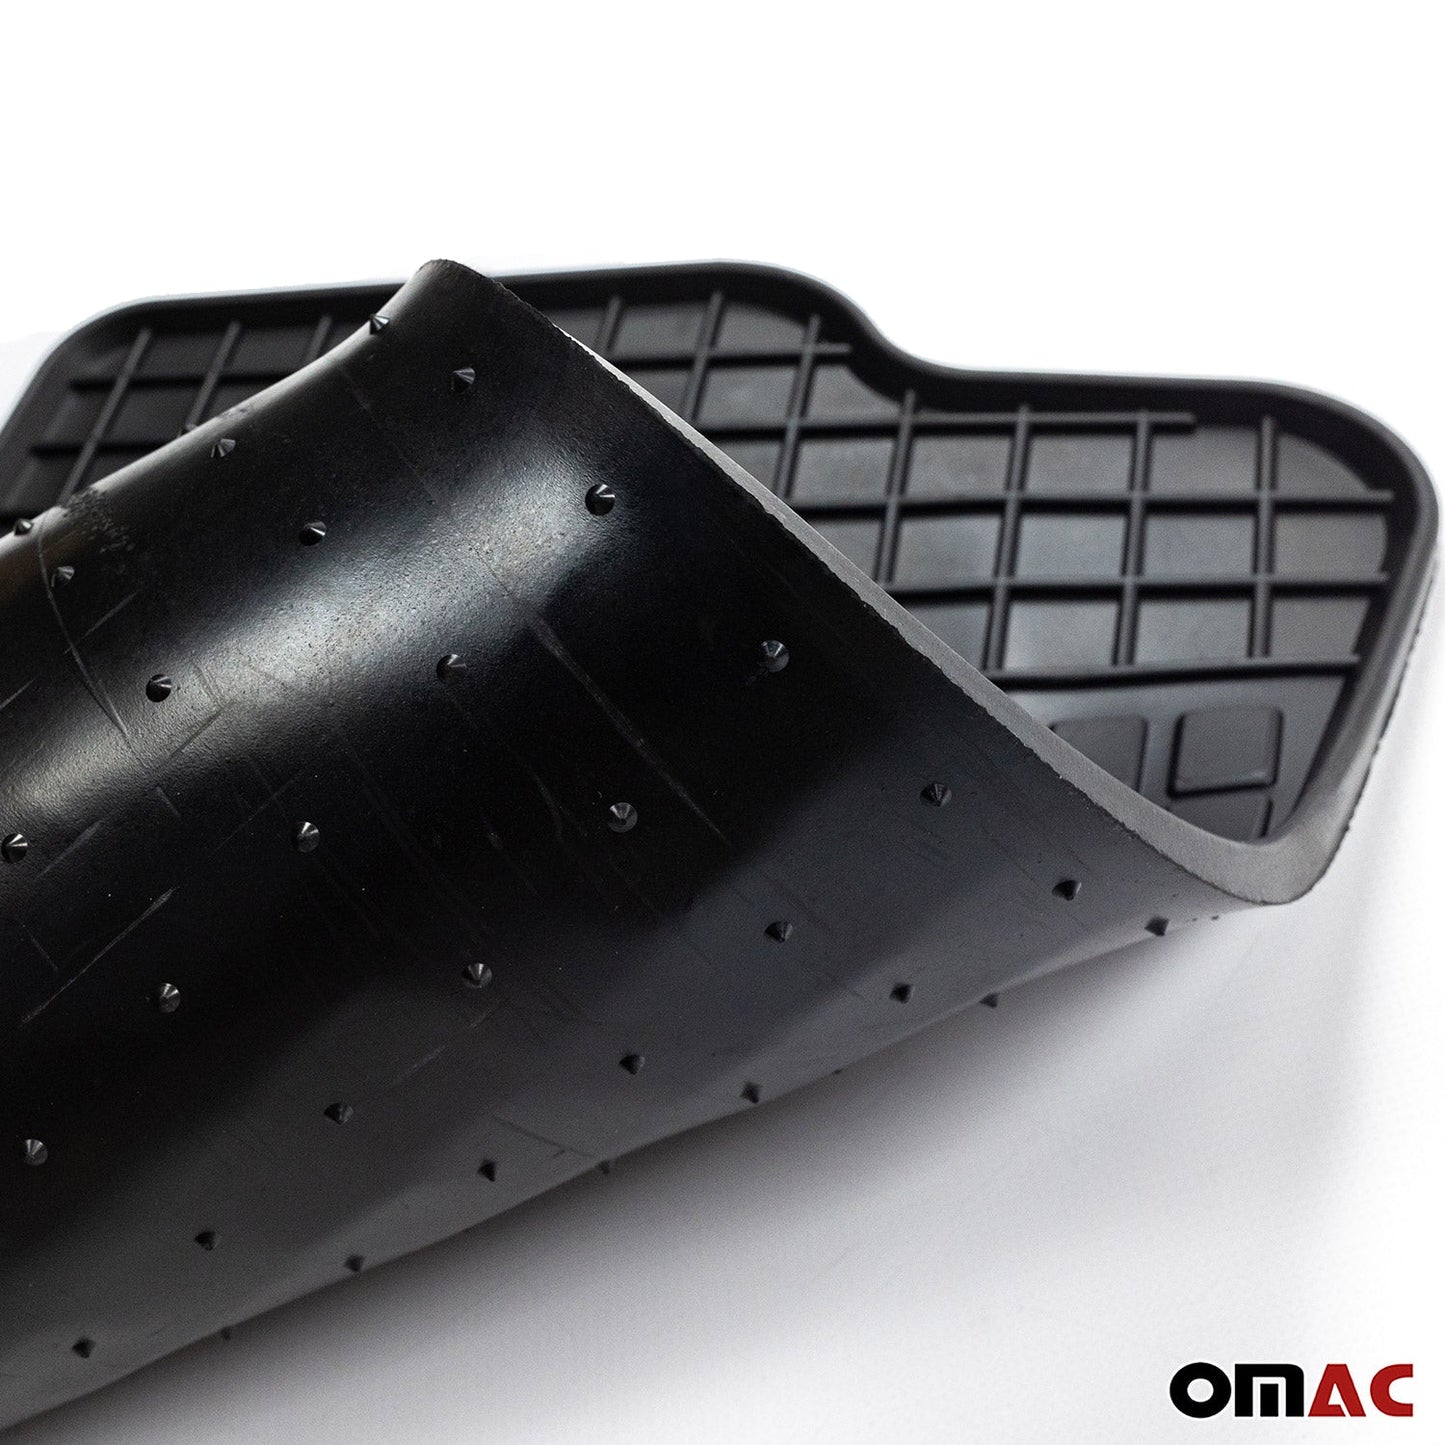 OMAC OMAC Floor Mats Liner for Nissan Cube 2009-2014 Black Rubber All-Weather 4 Pcs '5087484